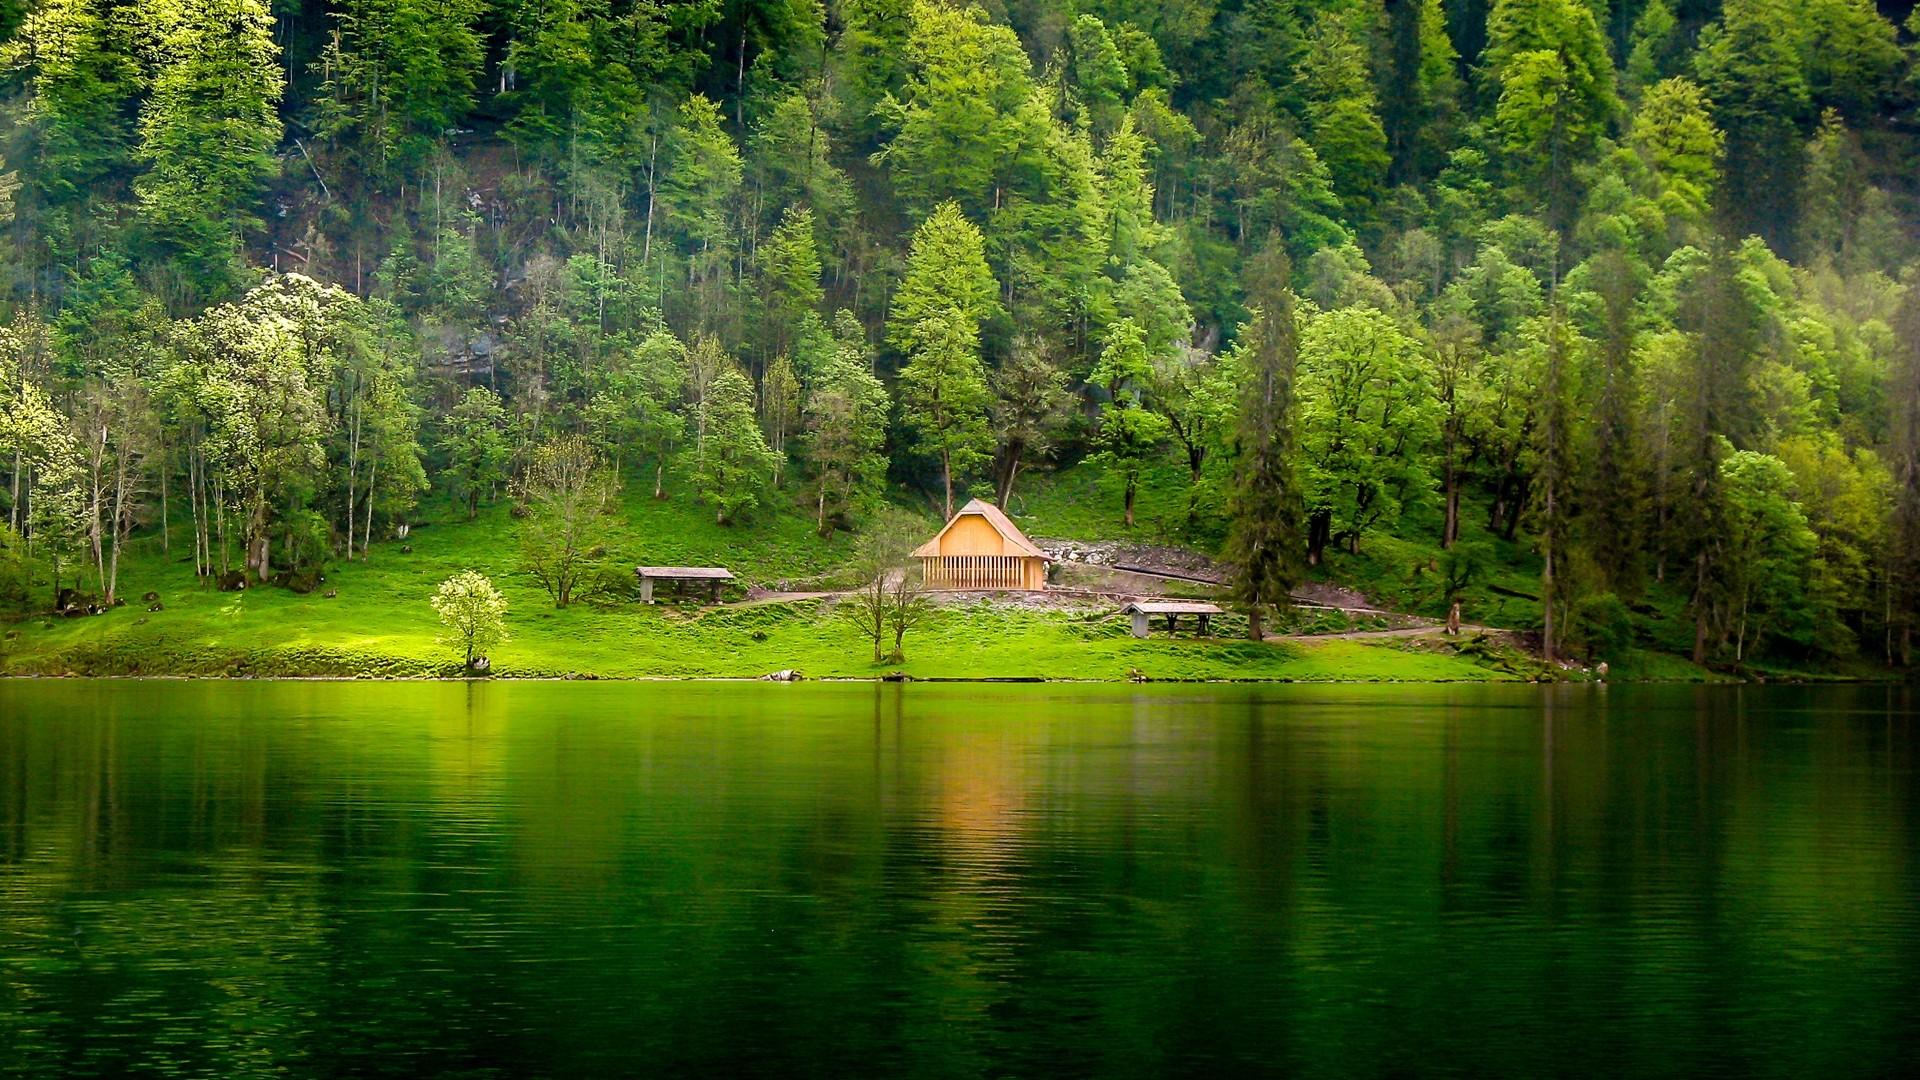 #hills, #forest, #lake, #cabin, #mist, #water, #nature